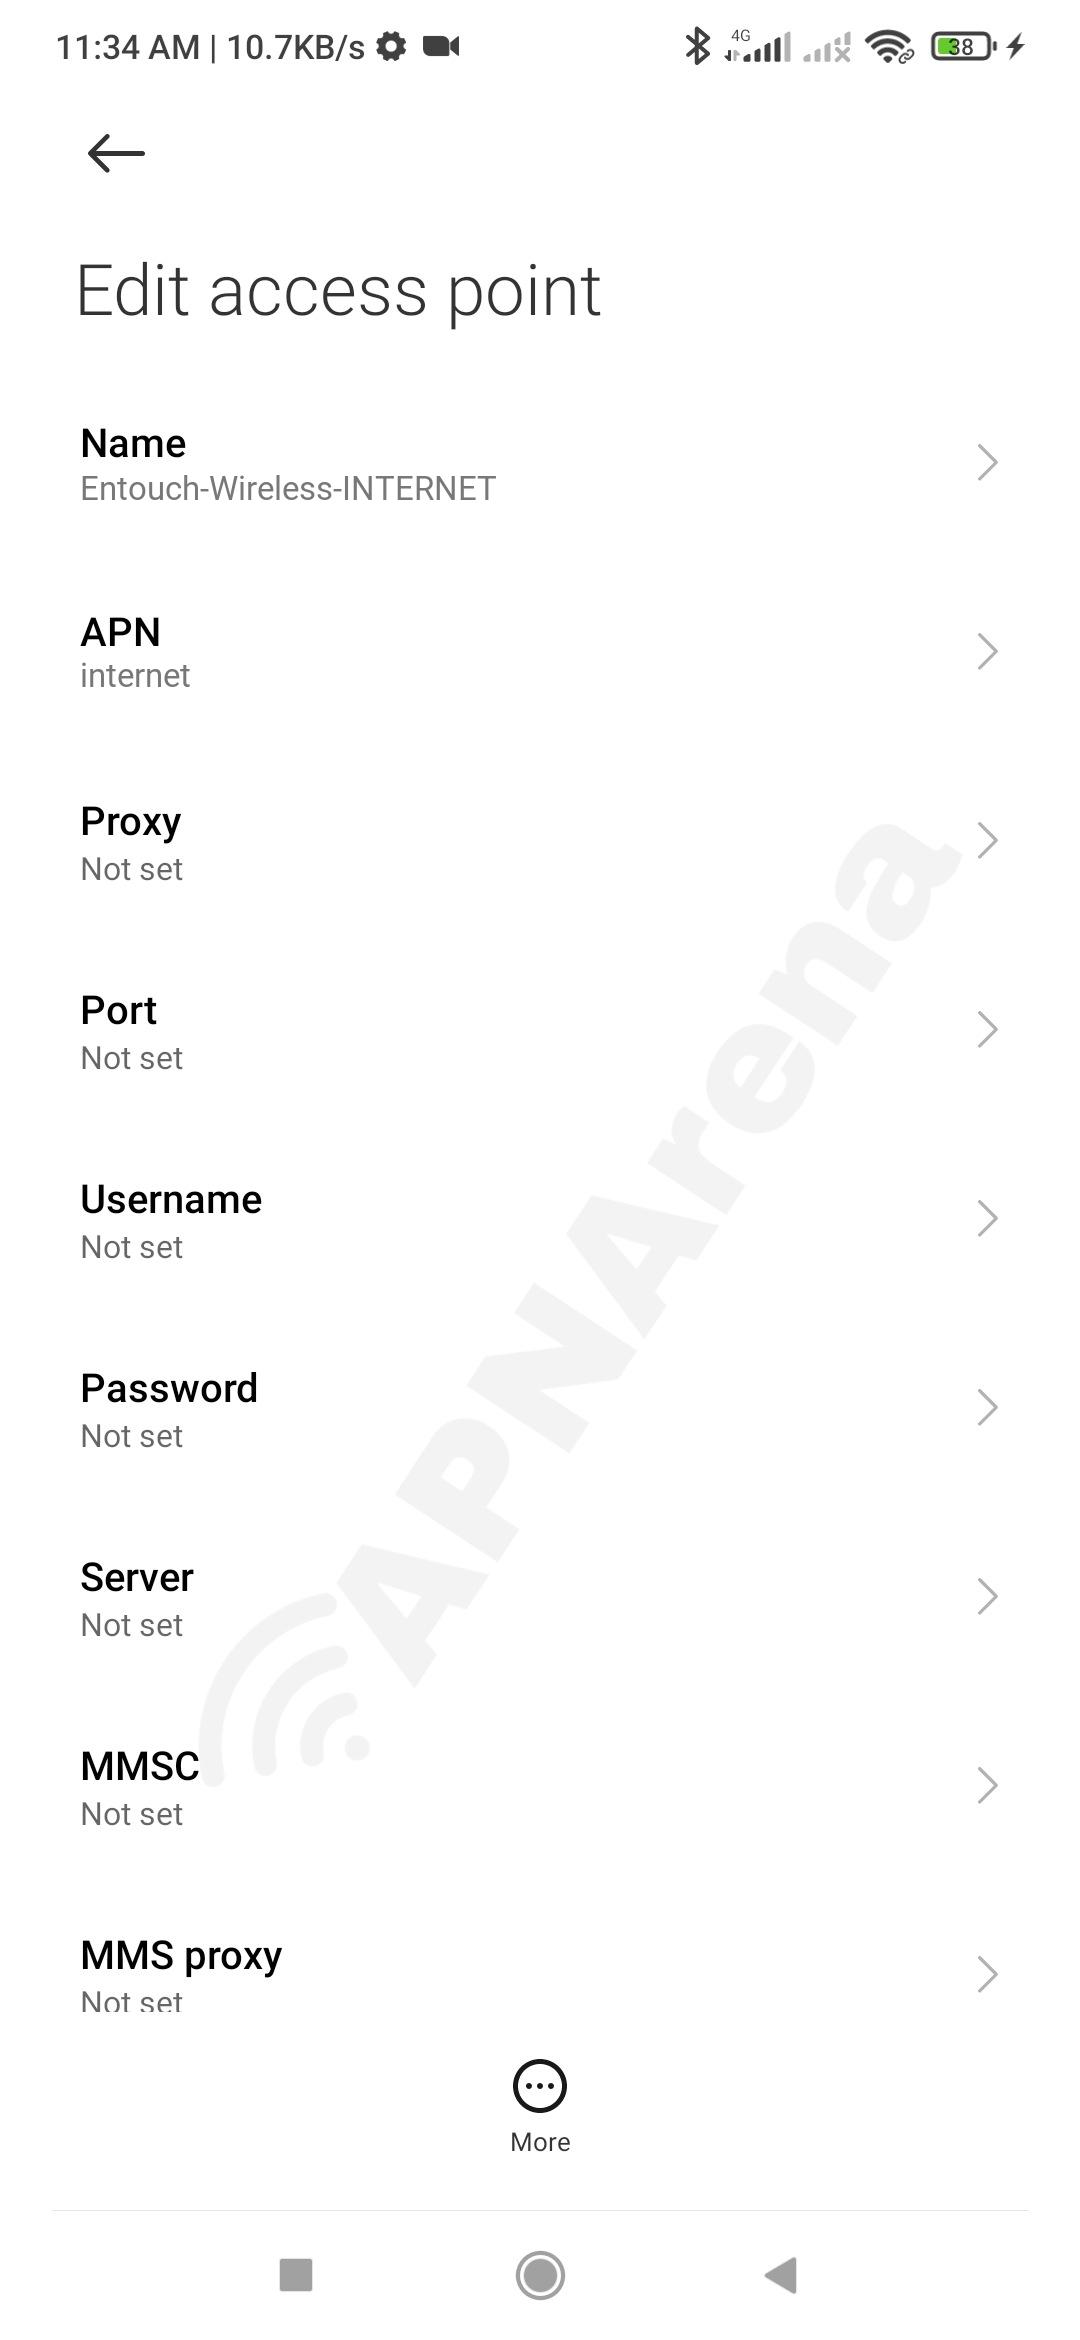 enTouch Wireless APN Settings for Android